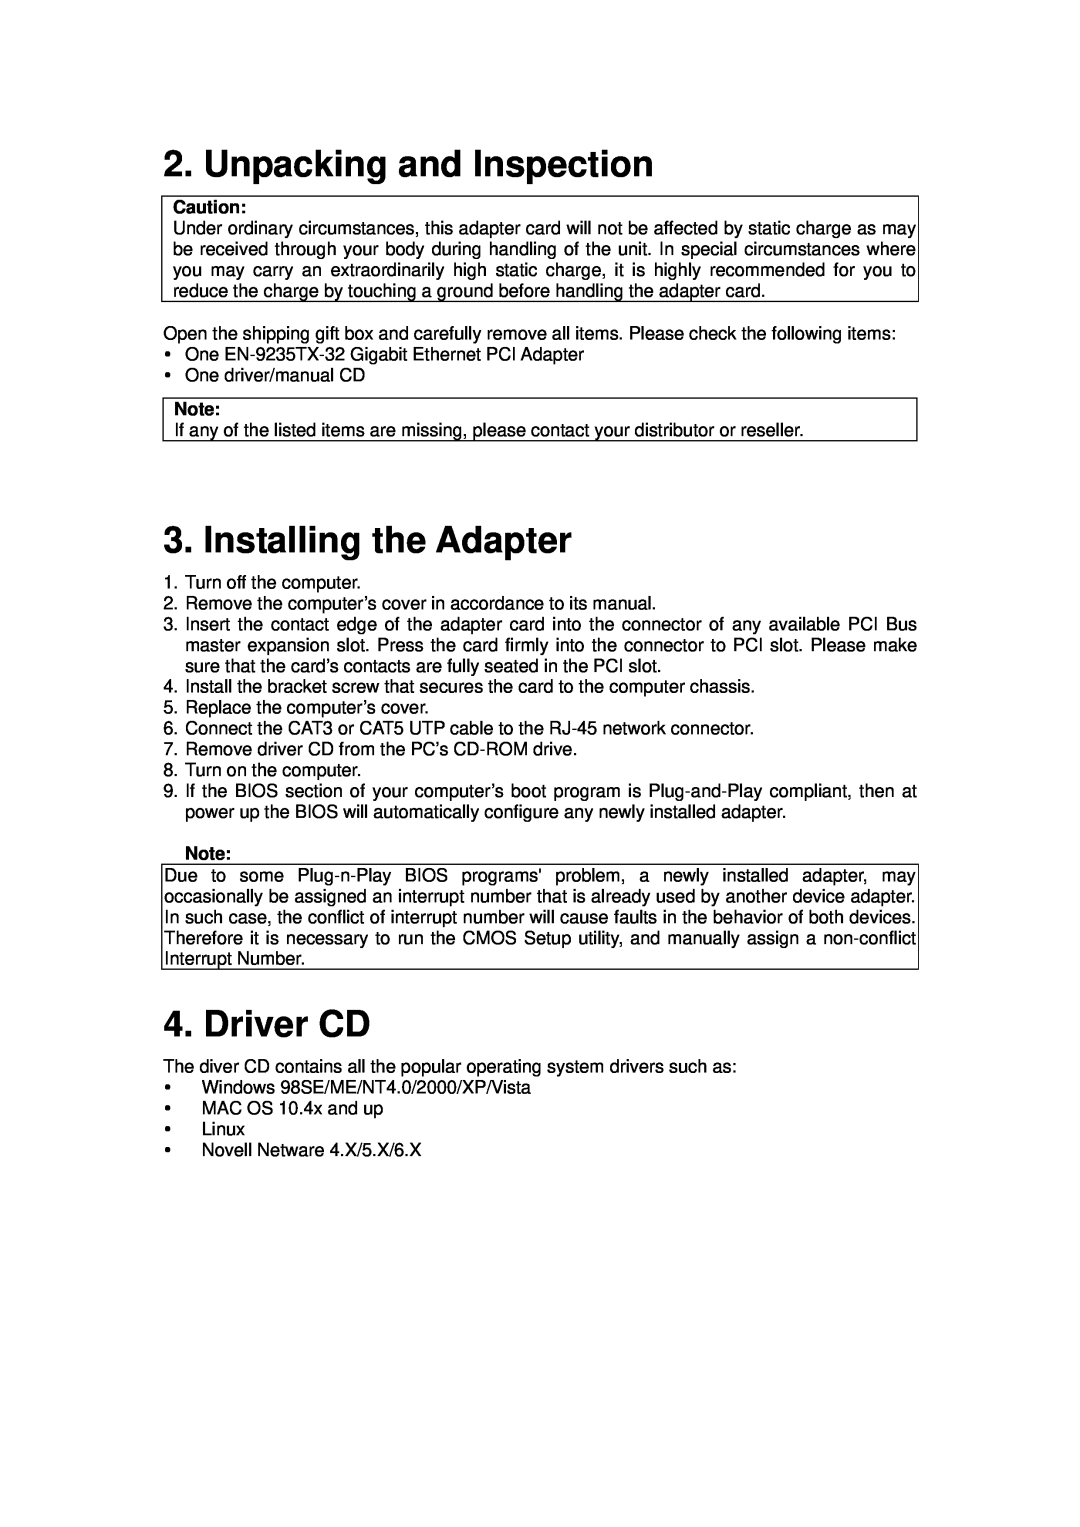 Edimax Technology EN-9235TX-32 manual Unpacking and Inspection, Installing the Adapter, Driver CD 